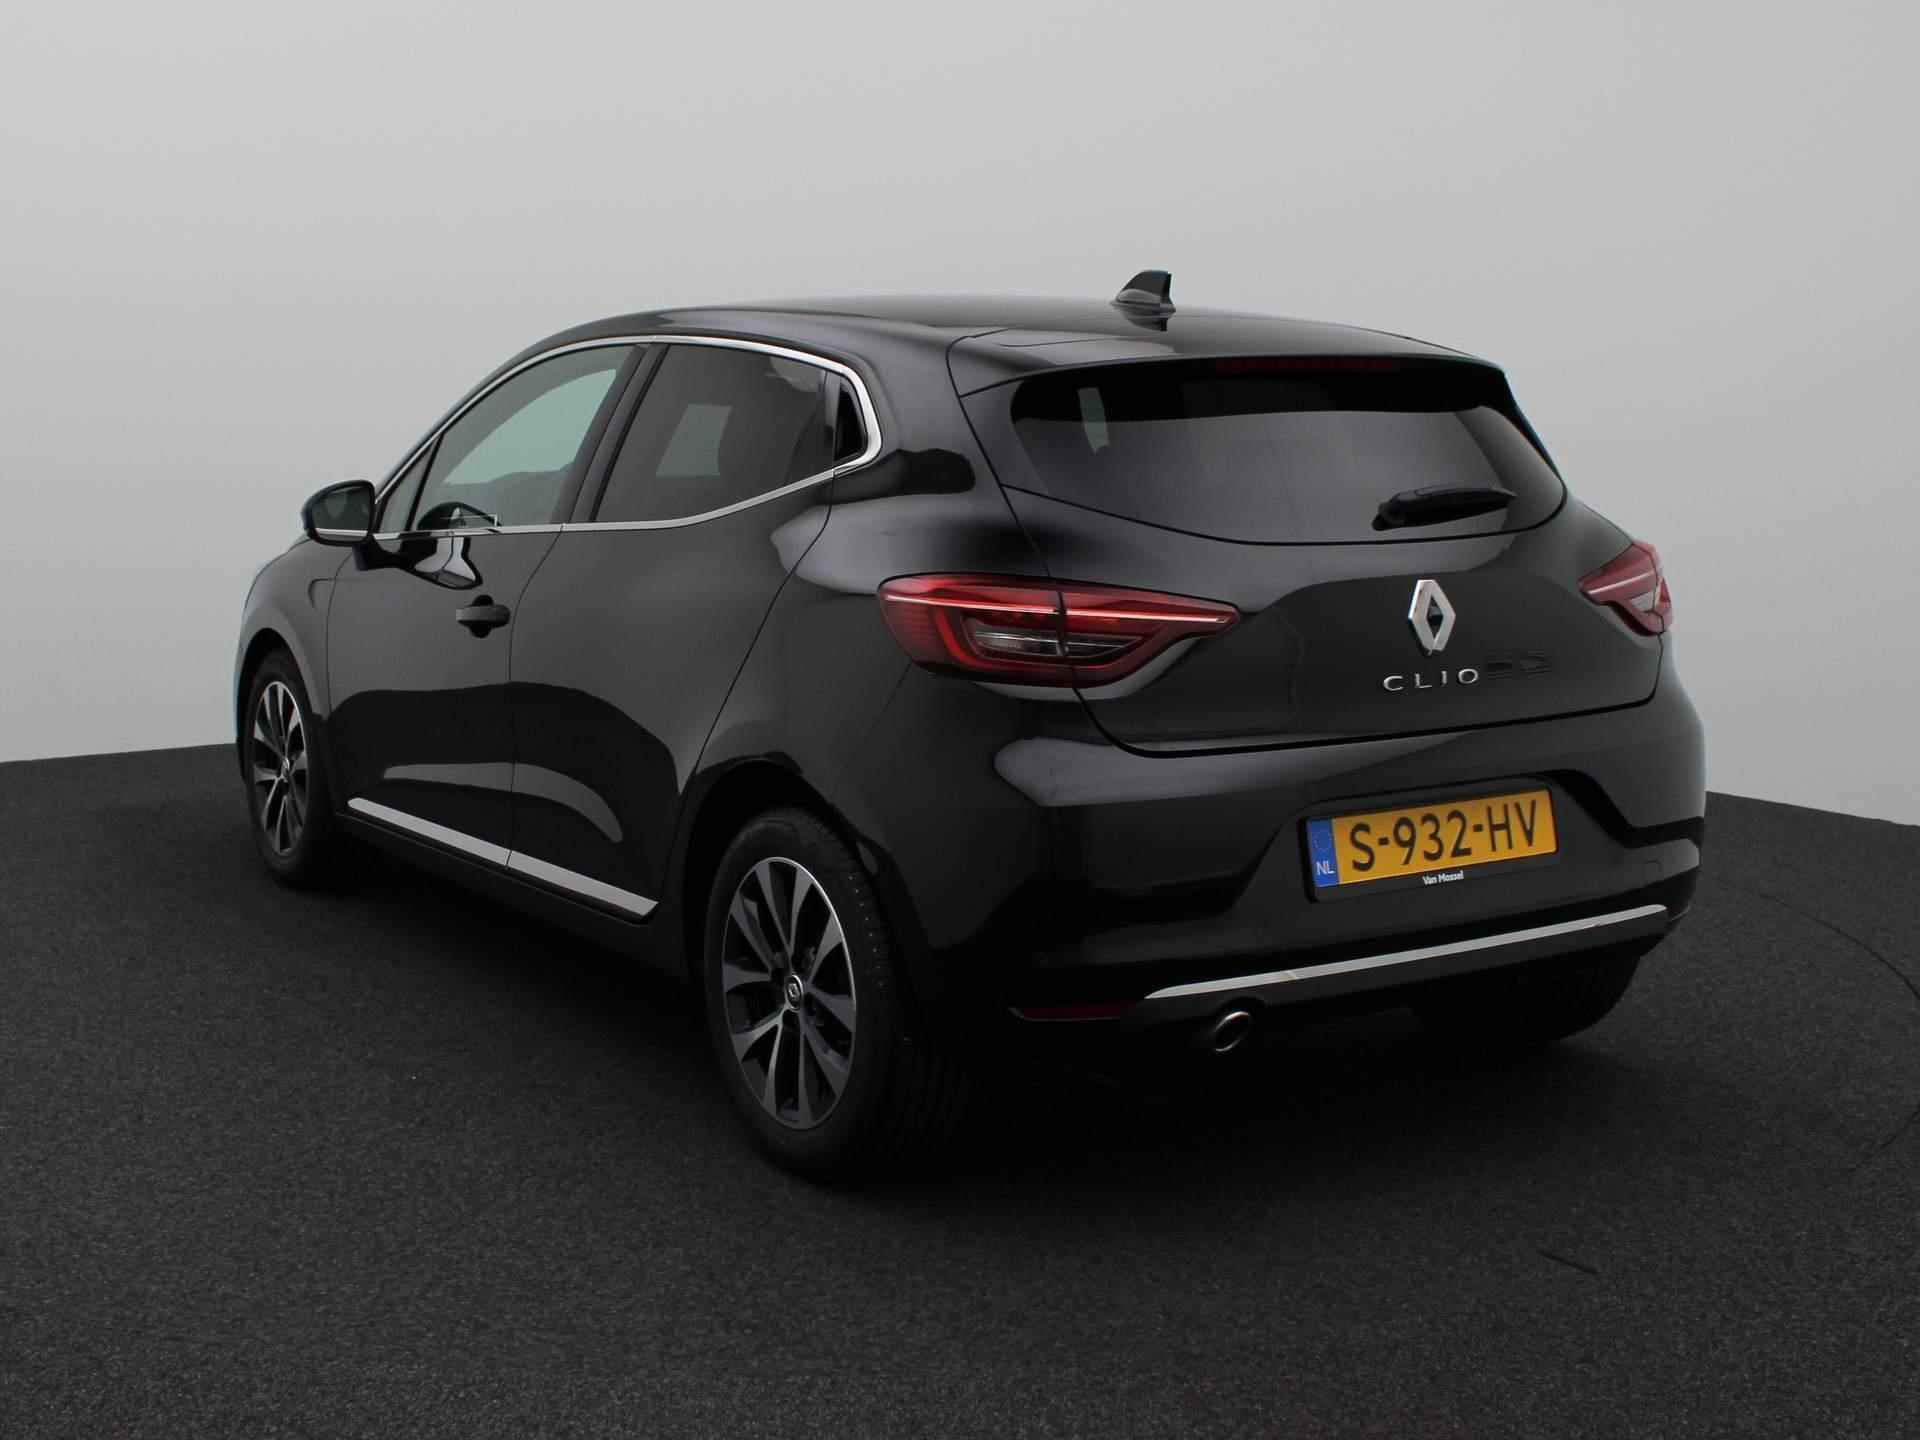 Renault Clio 1.0 TCe 90 Techno | Camera | PDC Voor+Achter | Climate Control | Multi-Sense | Full-Map Navigatie | LED Pure Vision | Privacy Glass | 16" LMV - 2/39